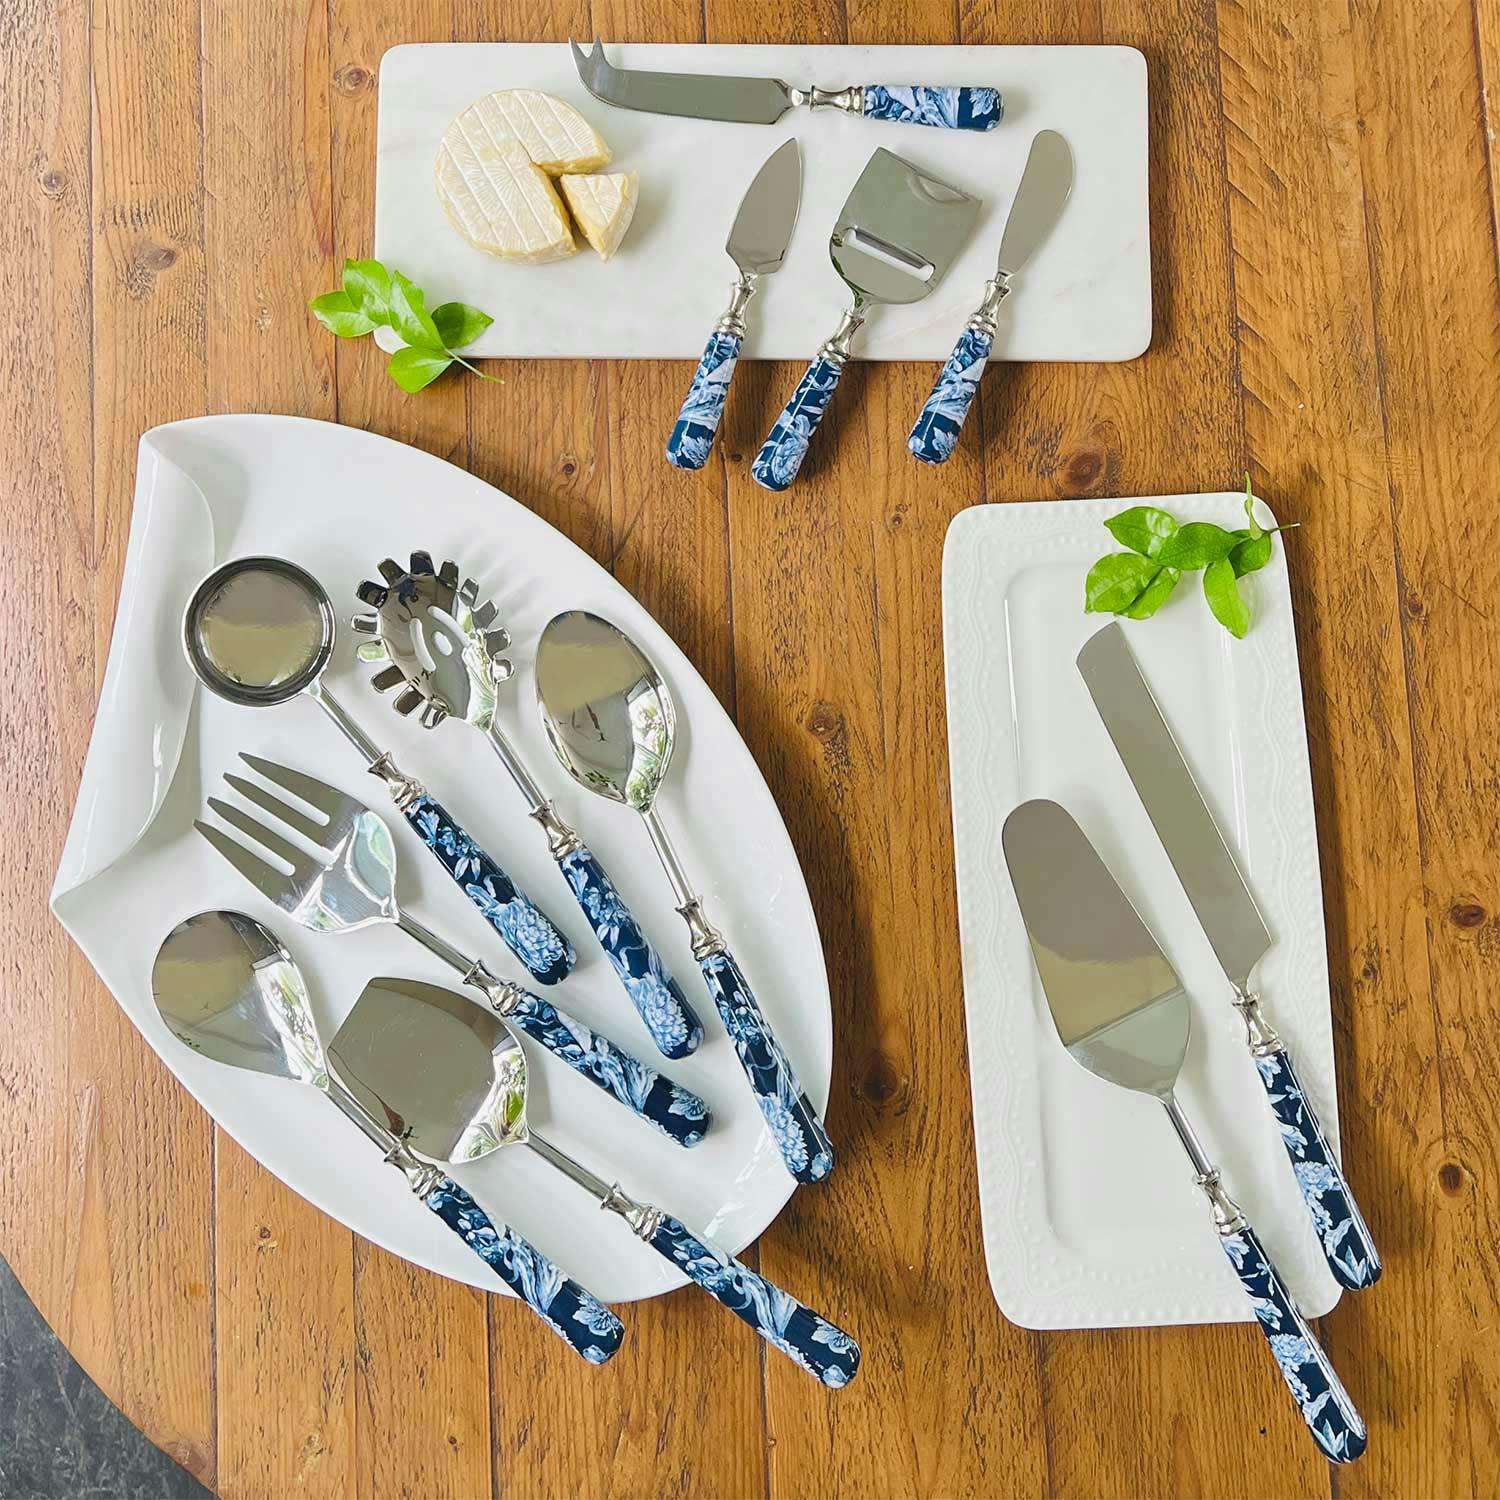 Serving Cutlery, Gift Set of 12 - Brittany Bleu, a product by Faaya Gifting